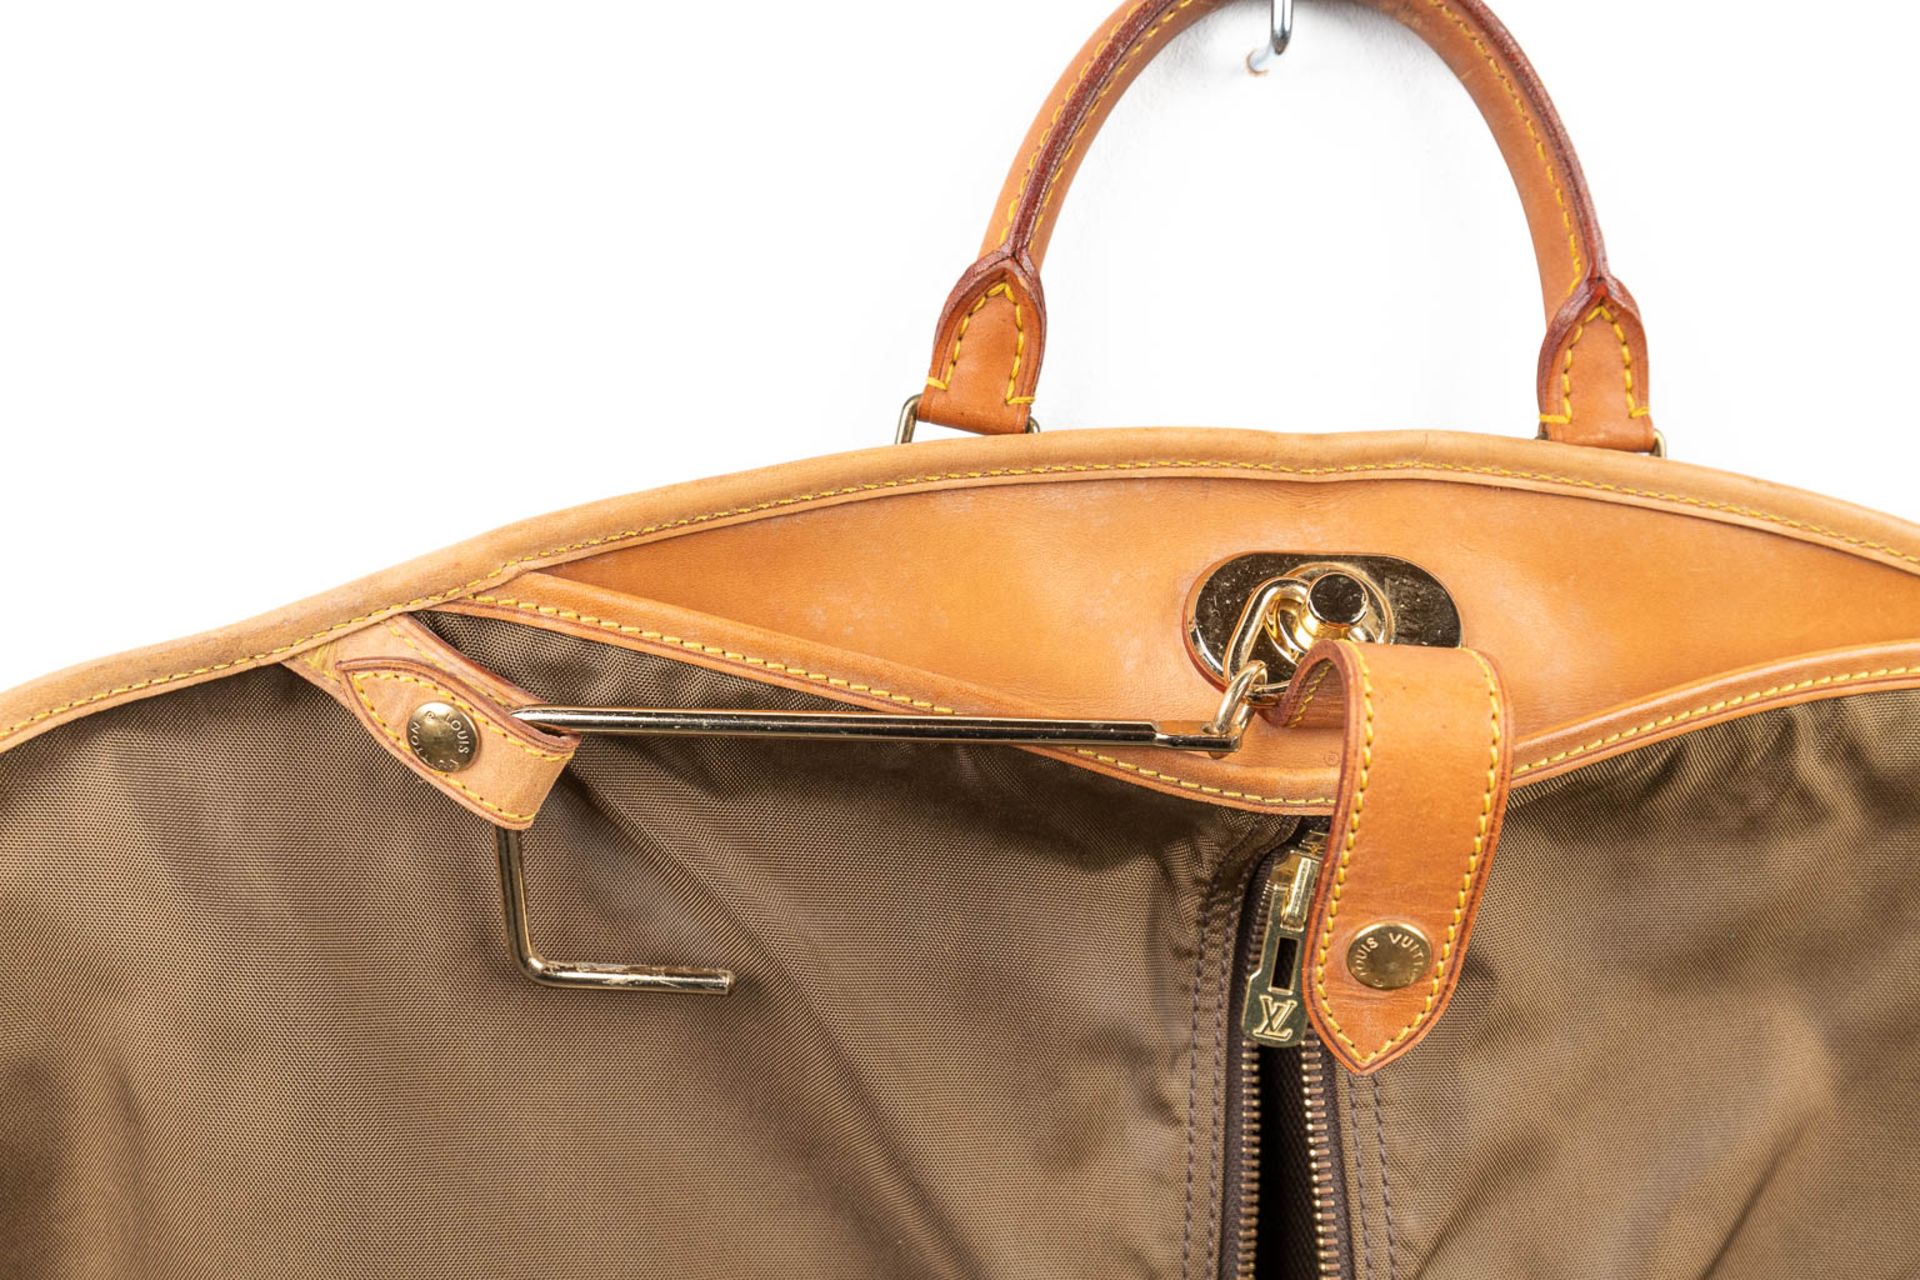 A garment suit traveller's bag made of leather by Louis Vuitton. (H:70cm) - Image 9 of 13